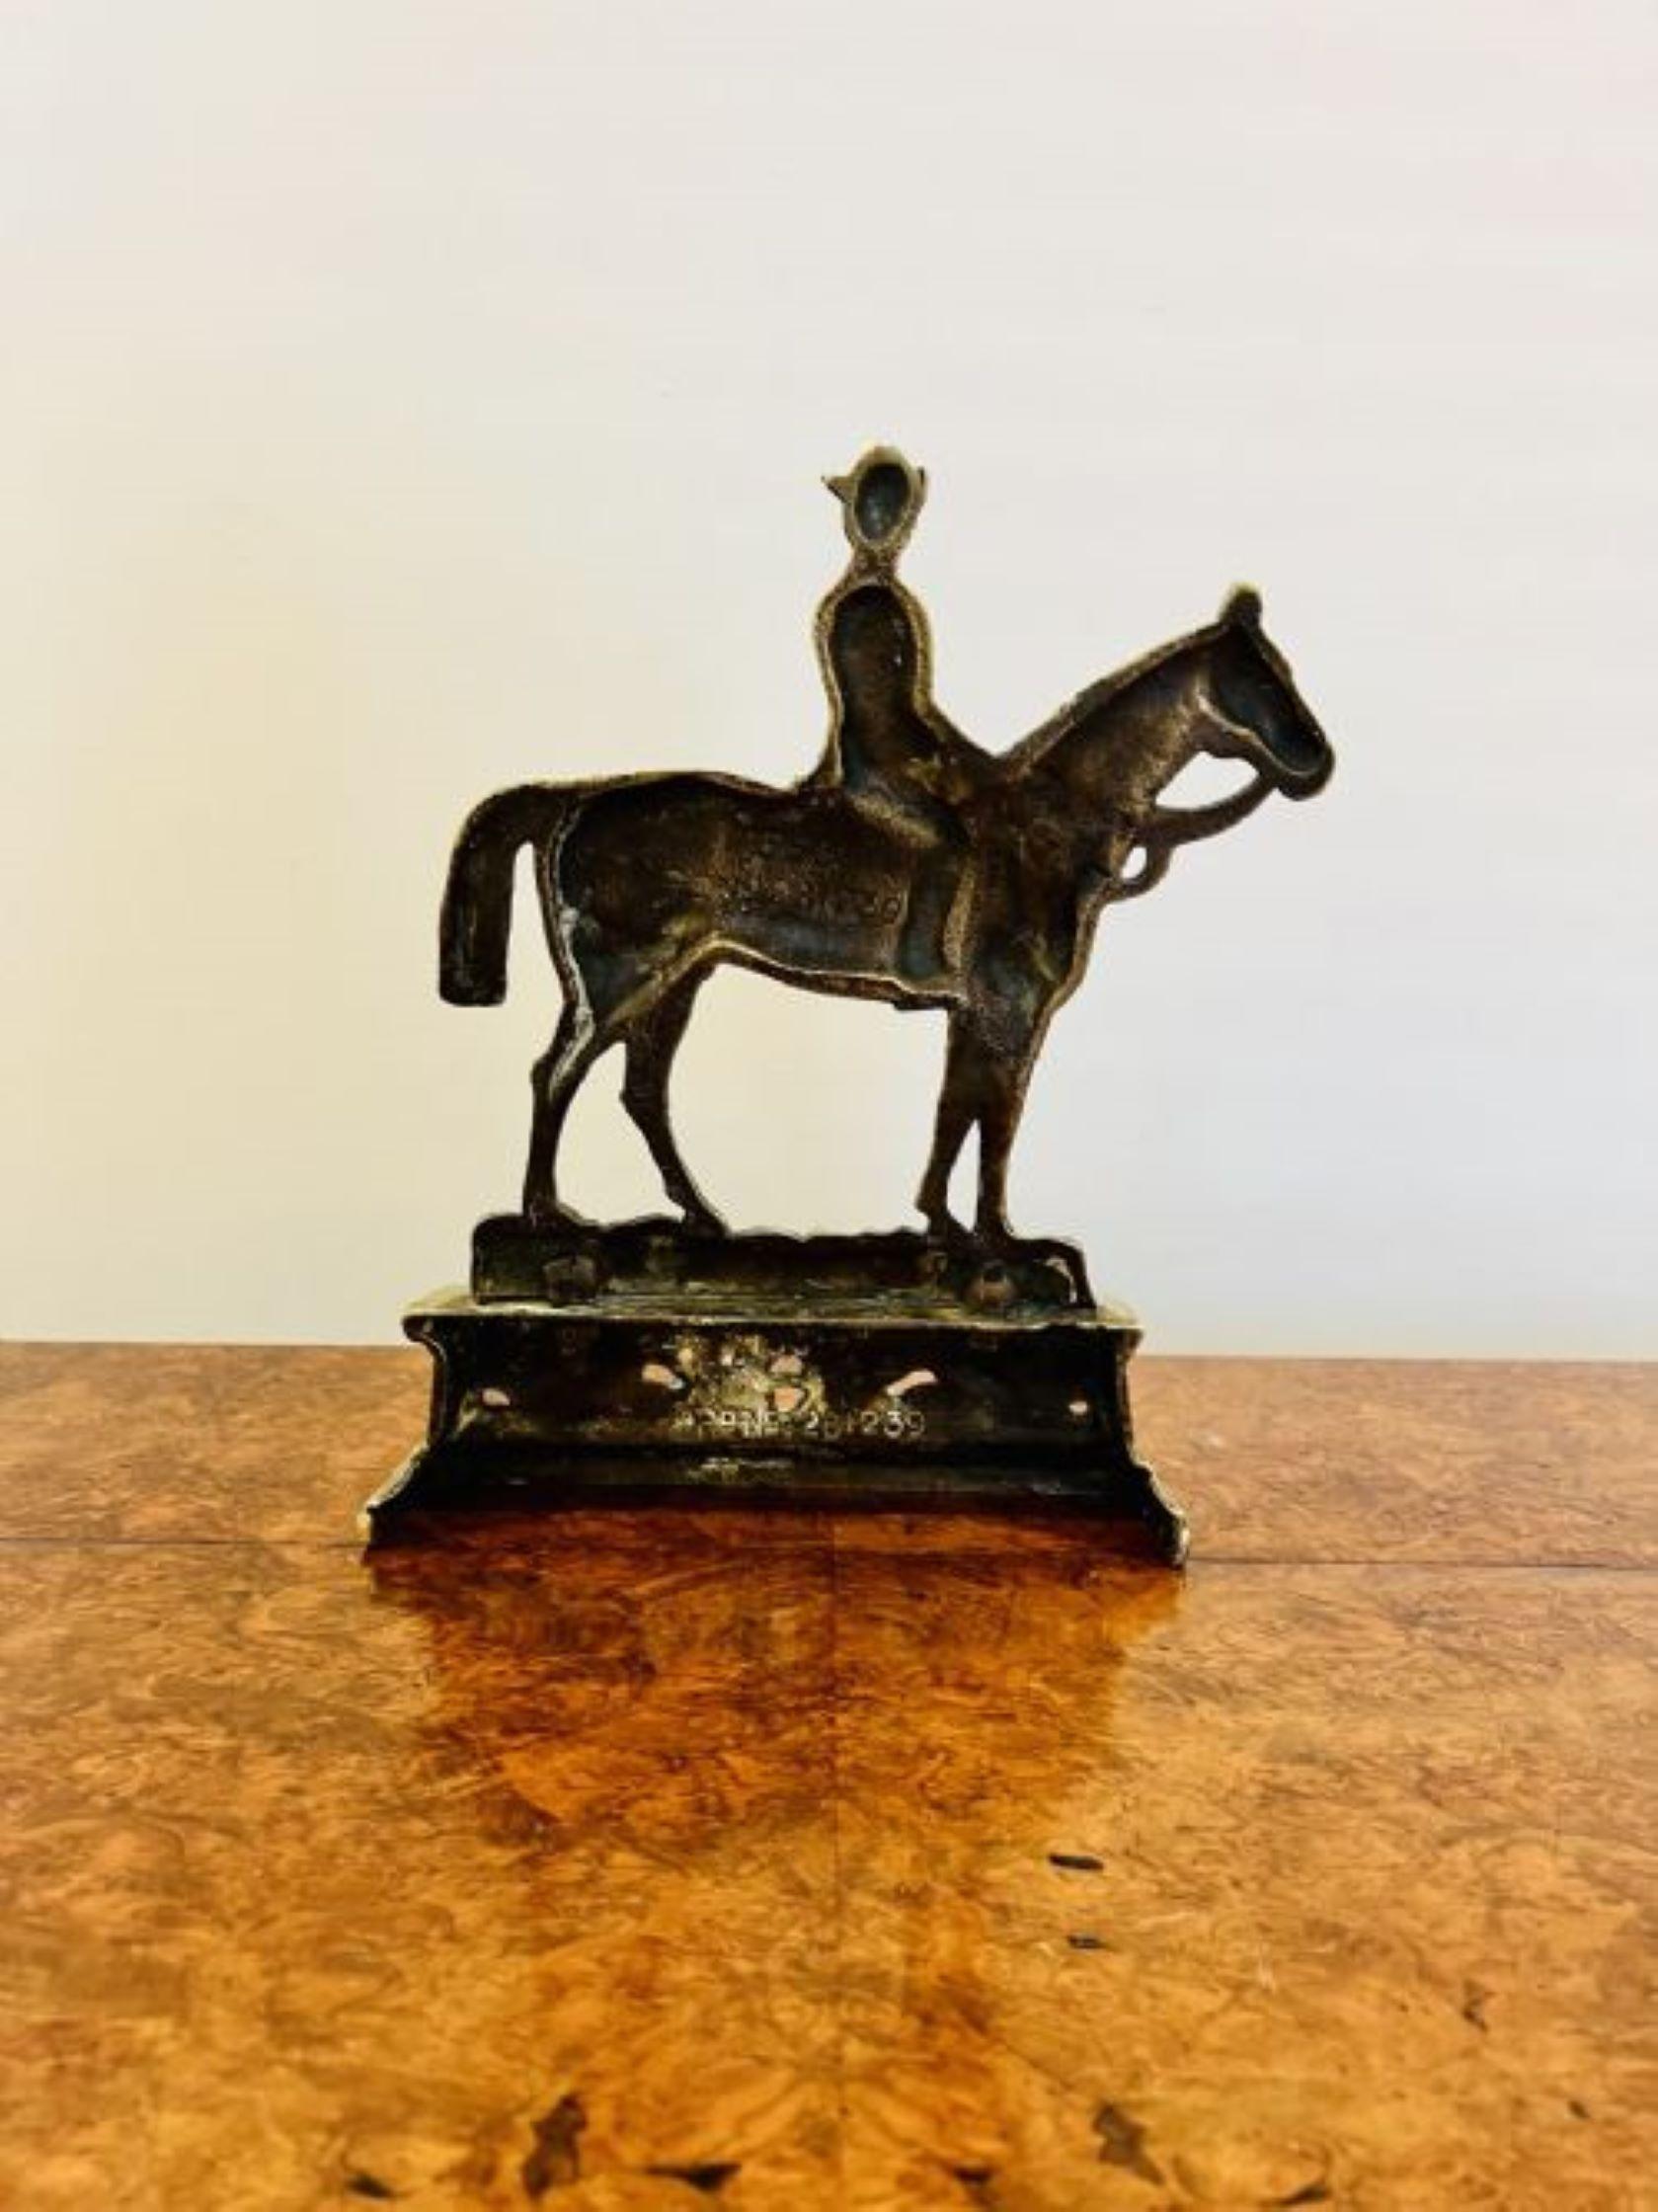 Quality antique brass ornate 'Dr Jim' doorstop having a modelled figure on horseback above a crossed spear and scroll decorated brass base 